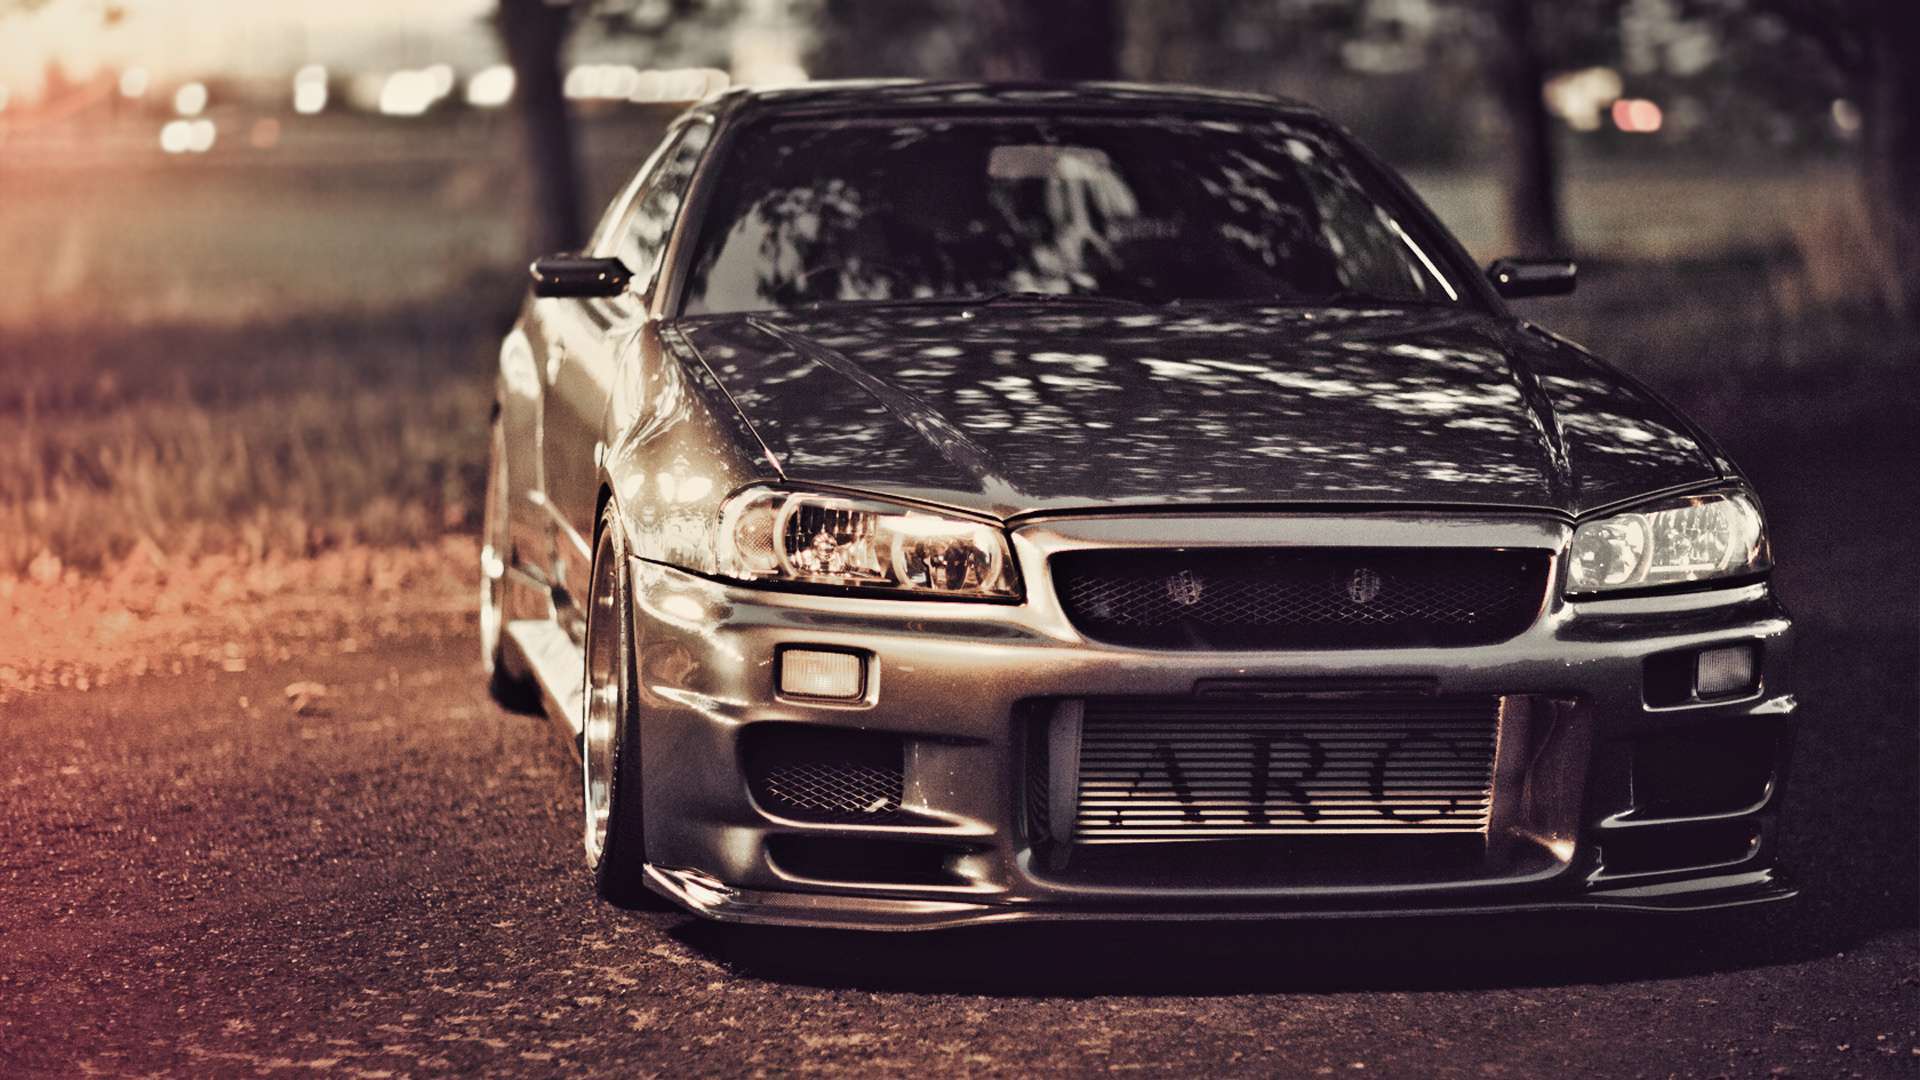 Nissan skyline r34 gt r Wallpapers Download | MobCup